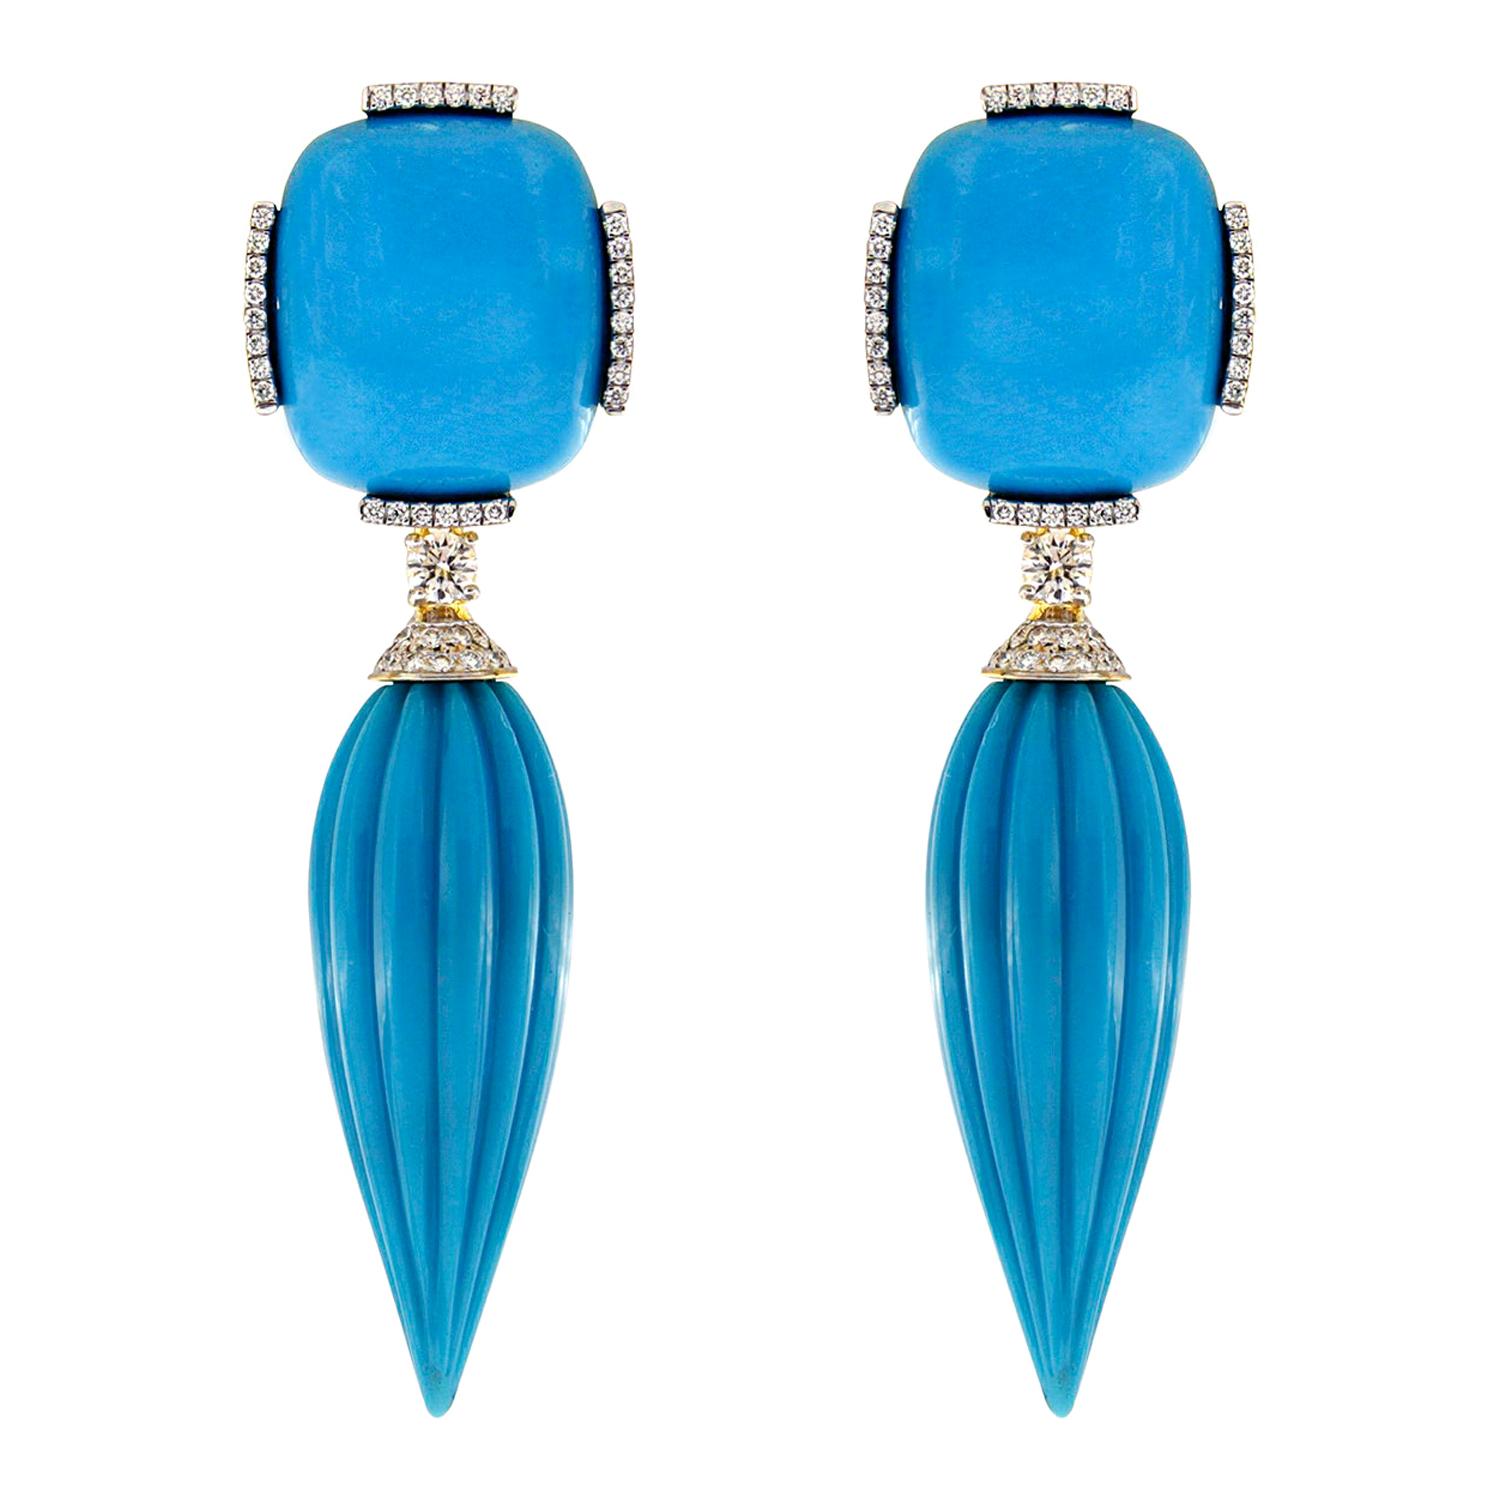 Valentin Magro Turquoise Drop Earrings with Diamonds